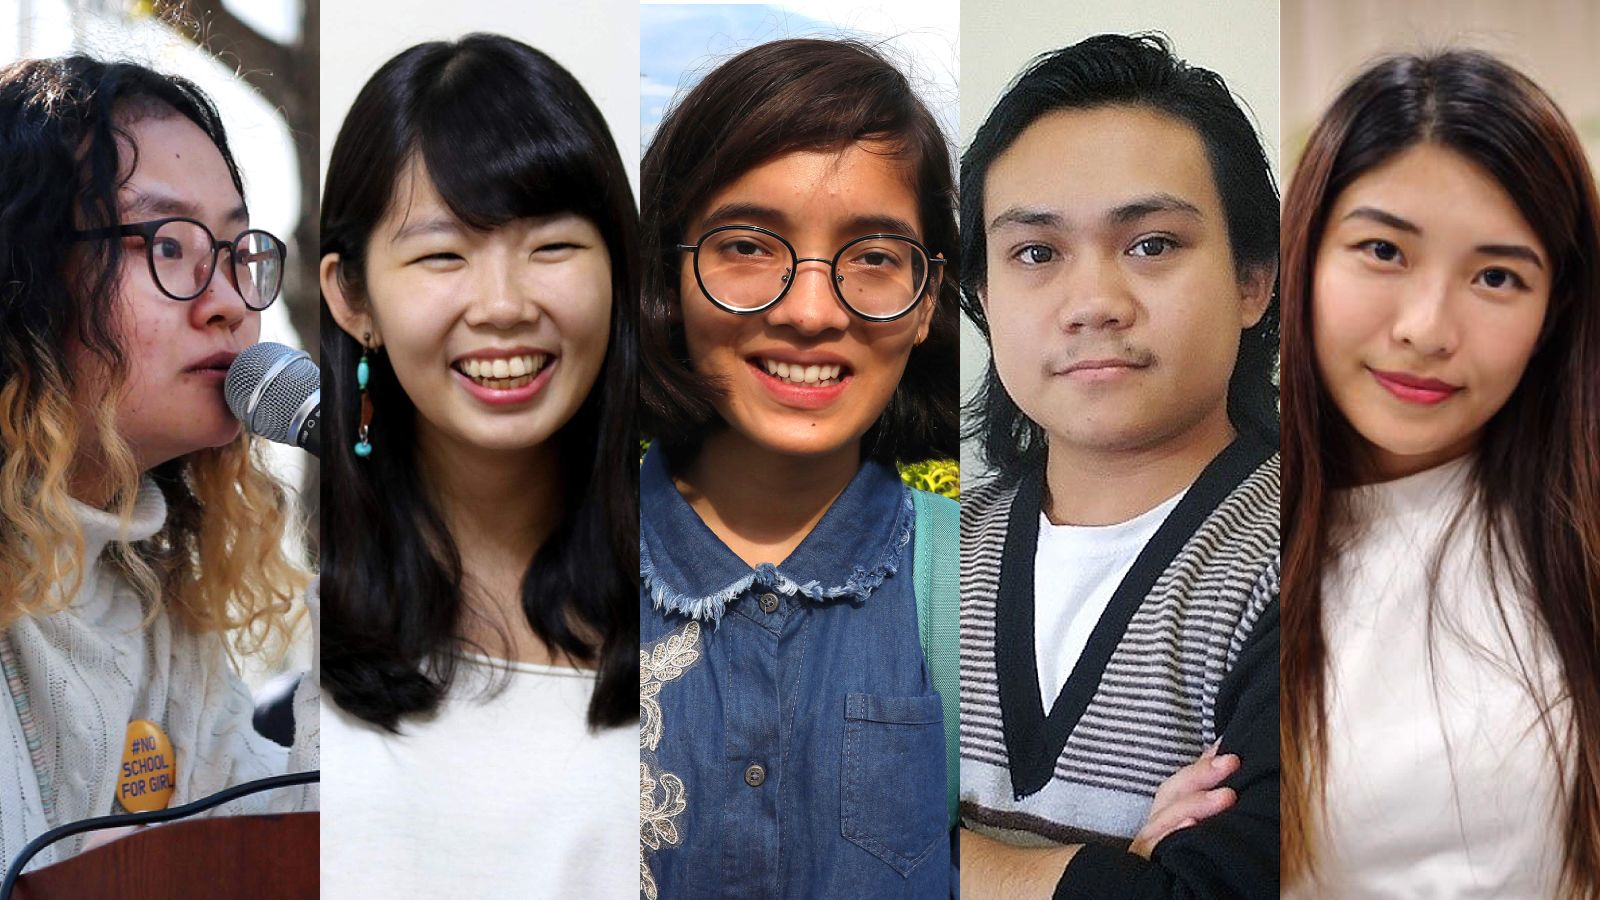 Australia School Girl Sex Movies - Meet 5 young activists who drove change in Asia this year | CNN